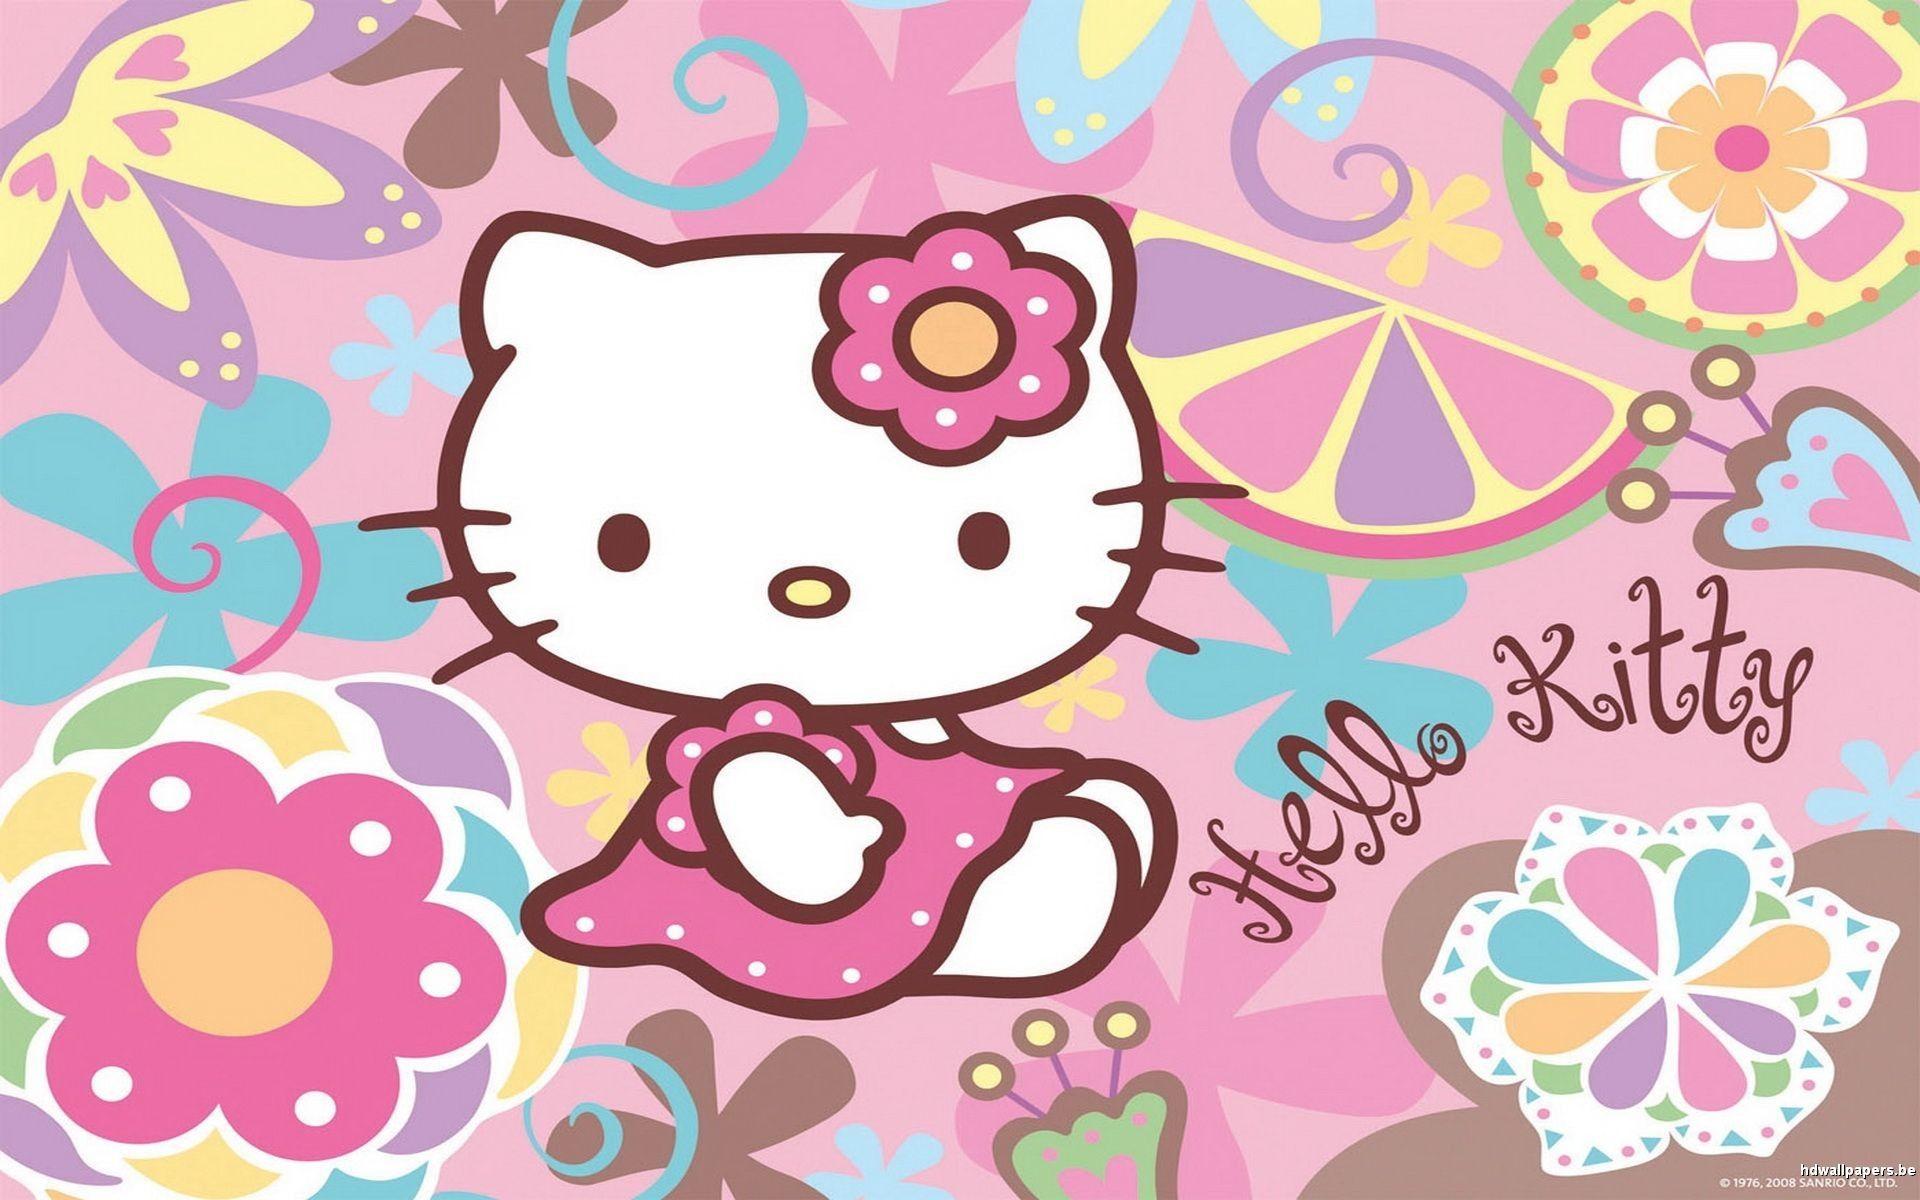 Hello Kitty and Friends Wallpapers - Top Free Hello Kitty and Friends